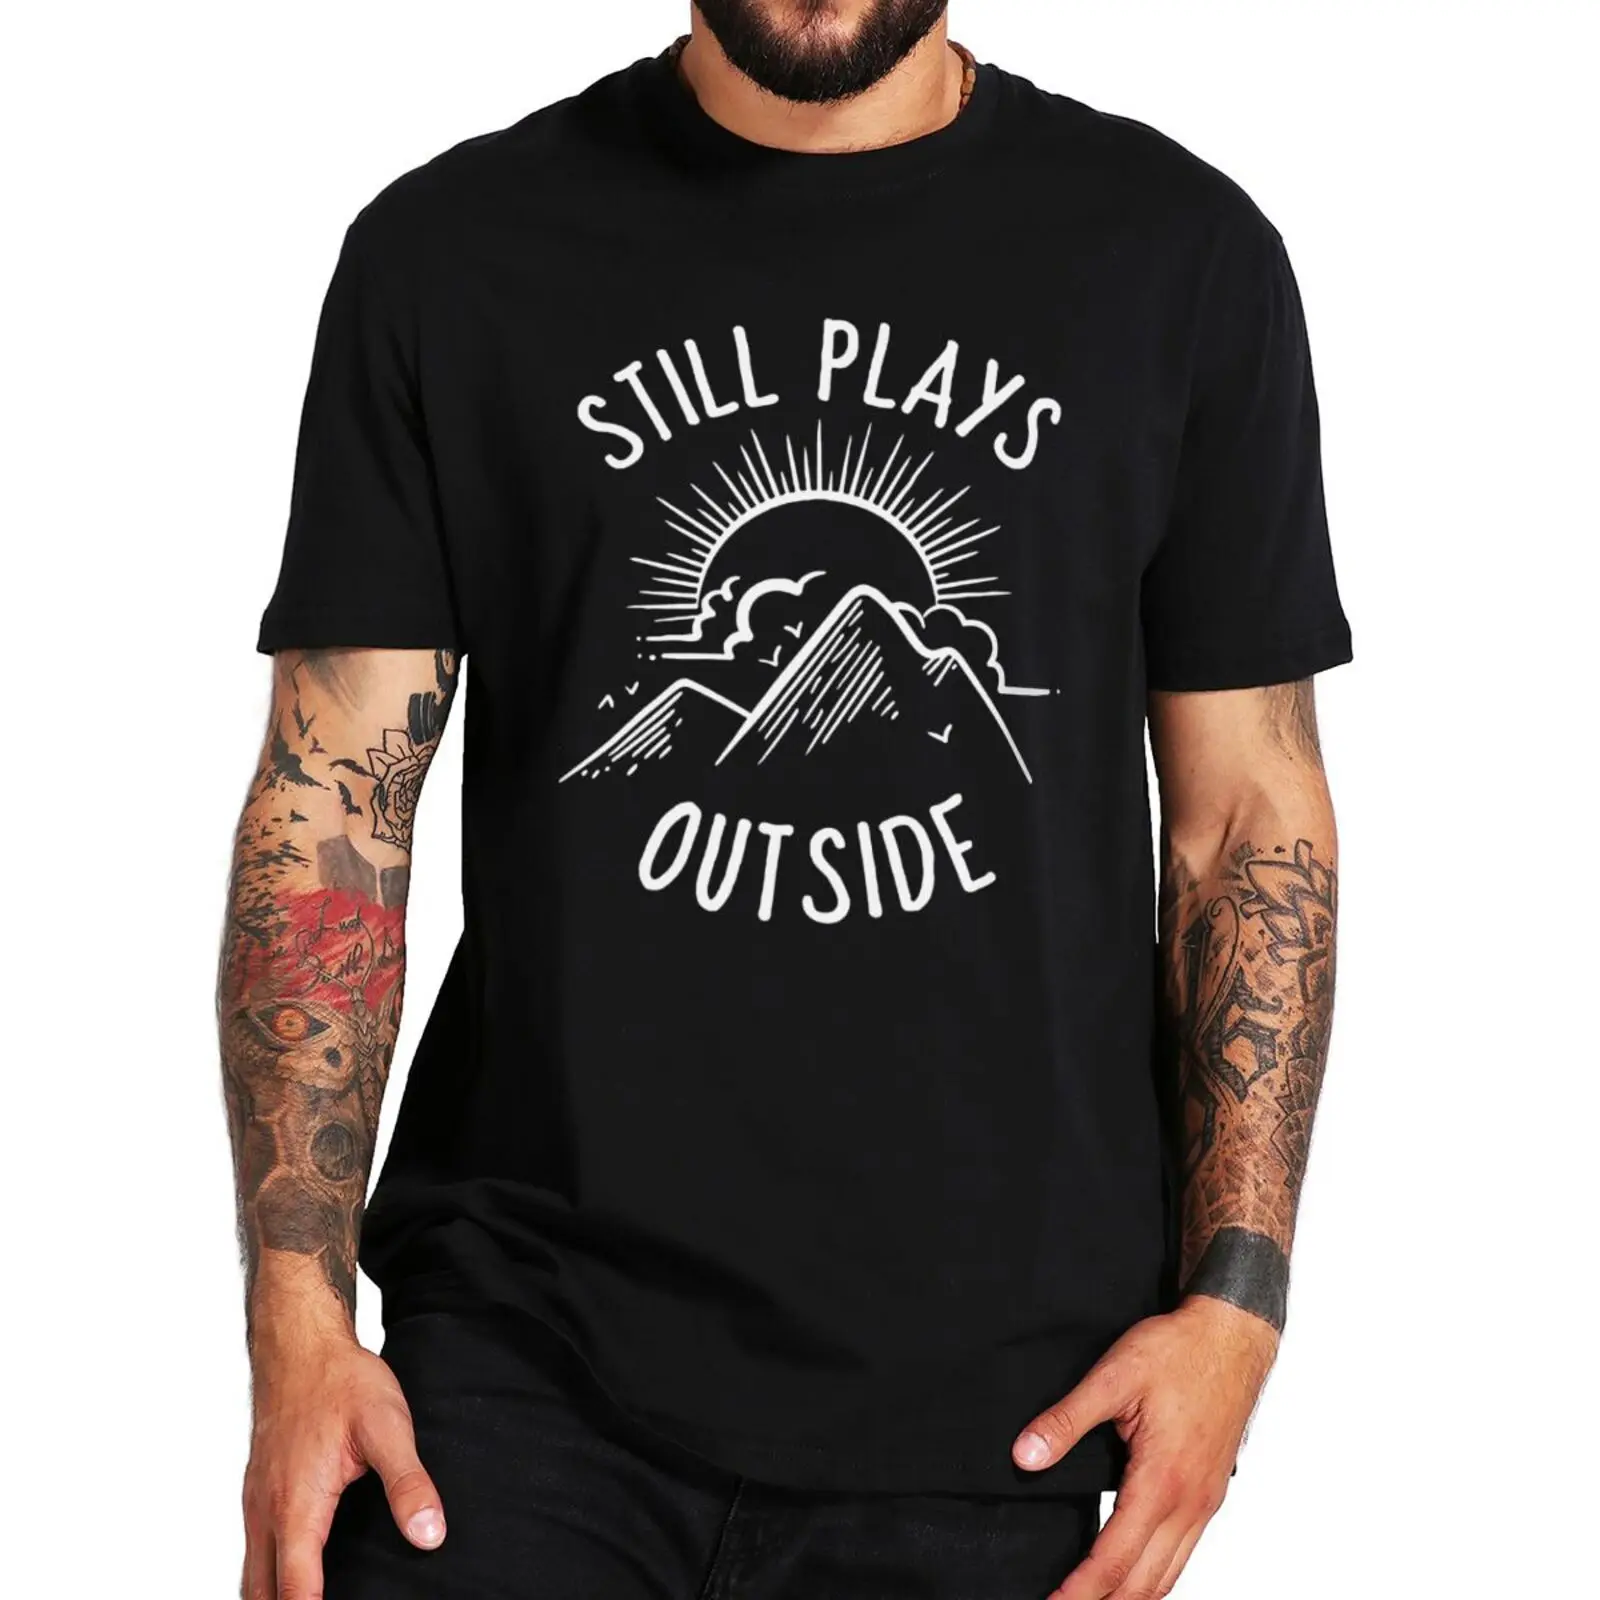 

Still Plays Outside T Shirt Funny Quote Camping Hiking Gift Short Sleeve EU Size Summer 100% Cotton Casual Men T-shirt